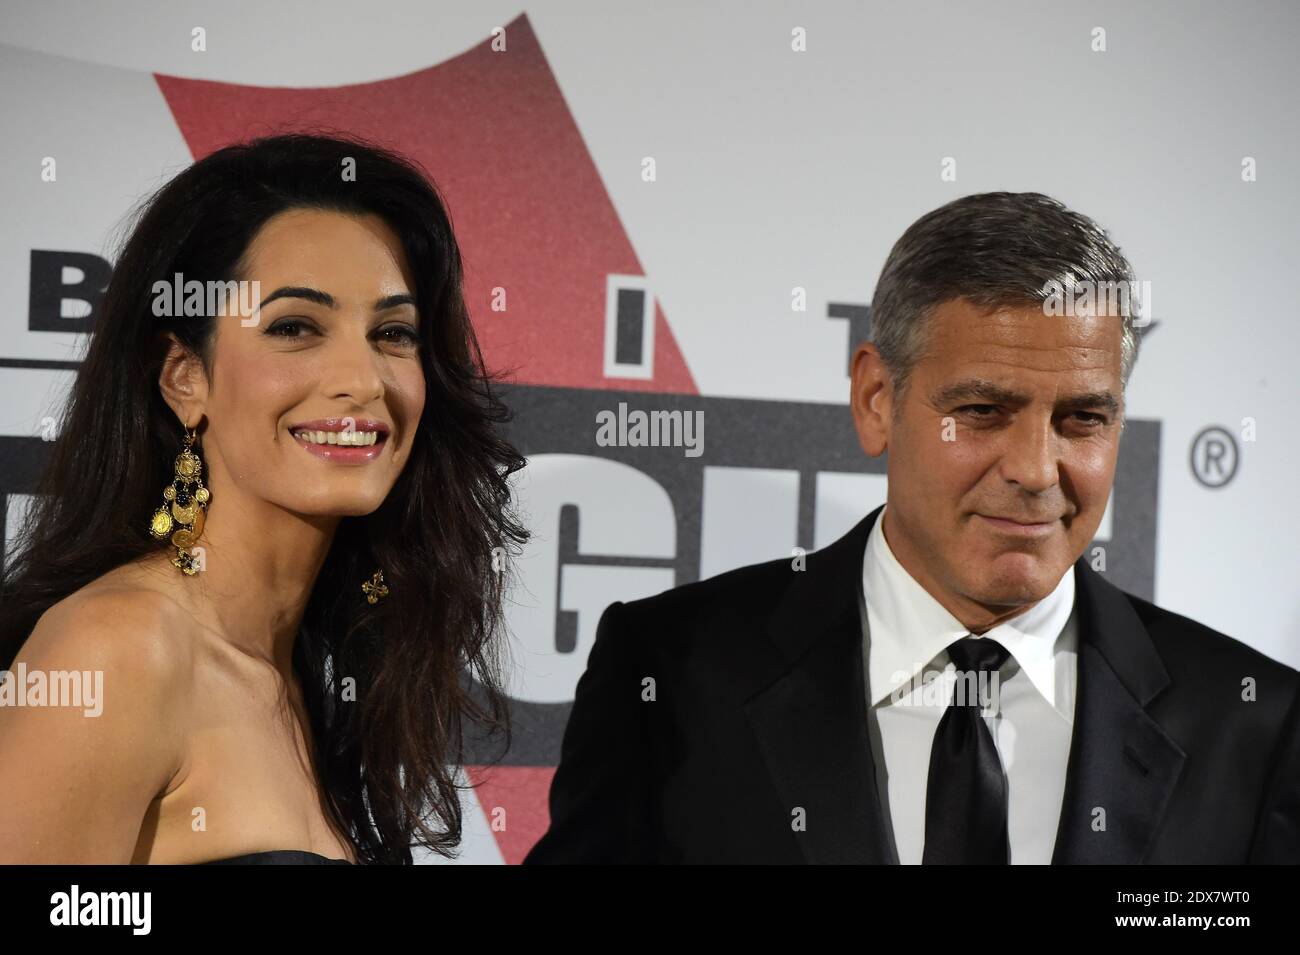 US actor-director George Clooney arrives with his fiancee, British-Lebanese human rights lawyer Amal Alamuddin for the Celebrity Fight Night at the Palazzo Vecchio in Florence, Italy, September 7, 2014. The charity event benefits the Andrea Bocelli Foundation and the Muhammad Ali Parkinson Center. Photo by Eric Vandeville/ABACAPRESS.COM Stock Photo